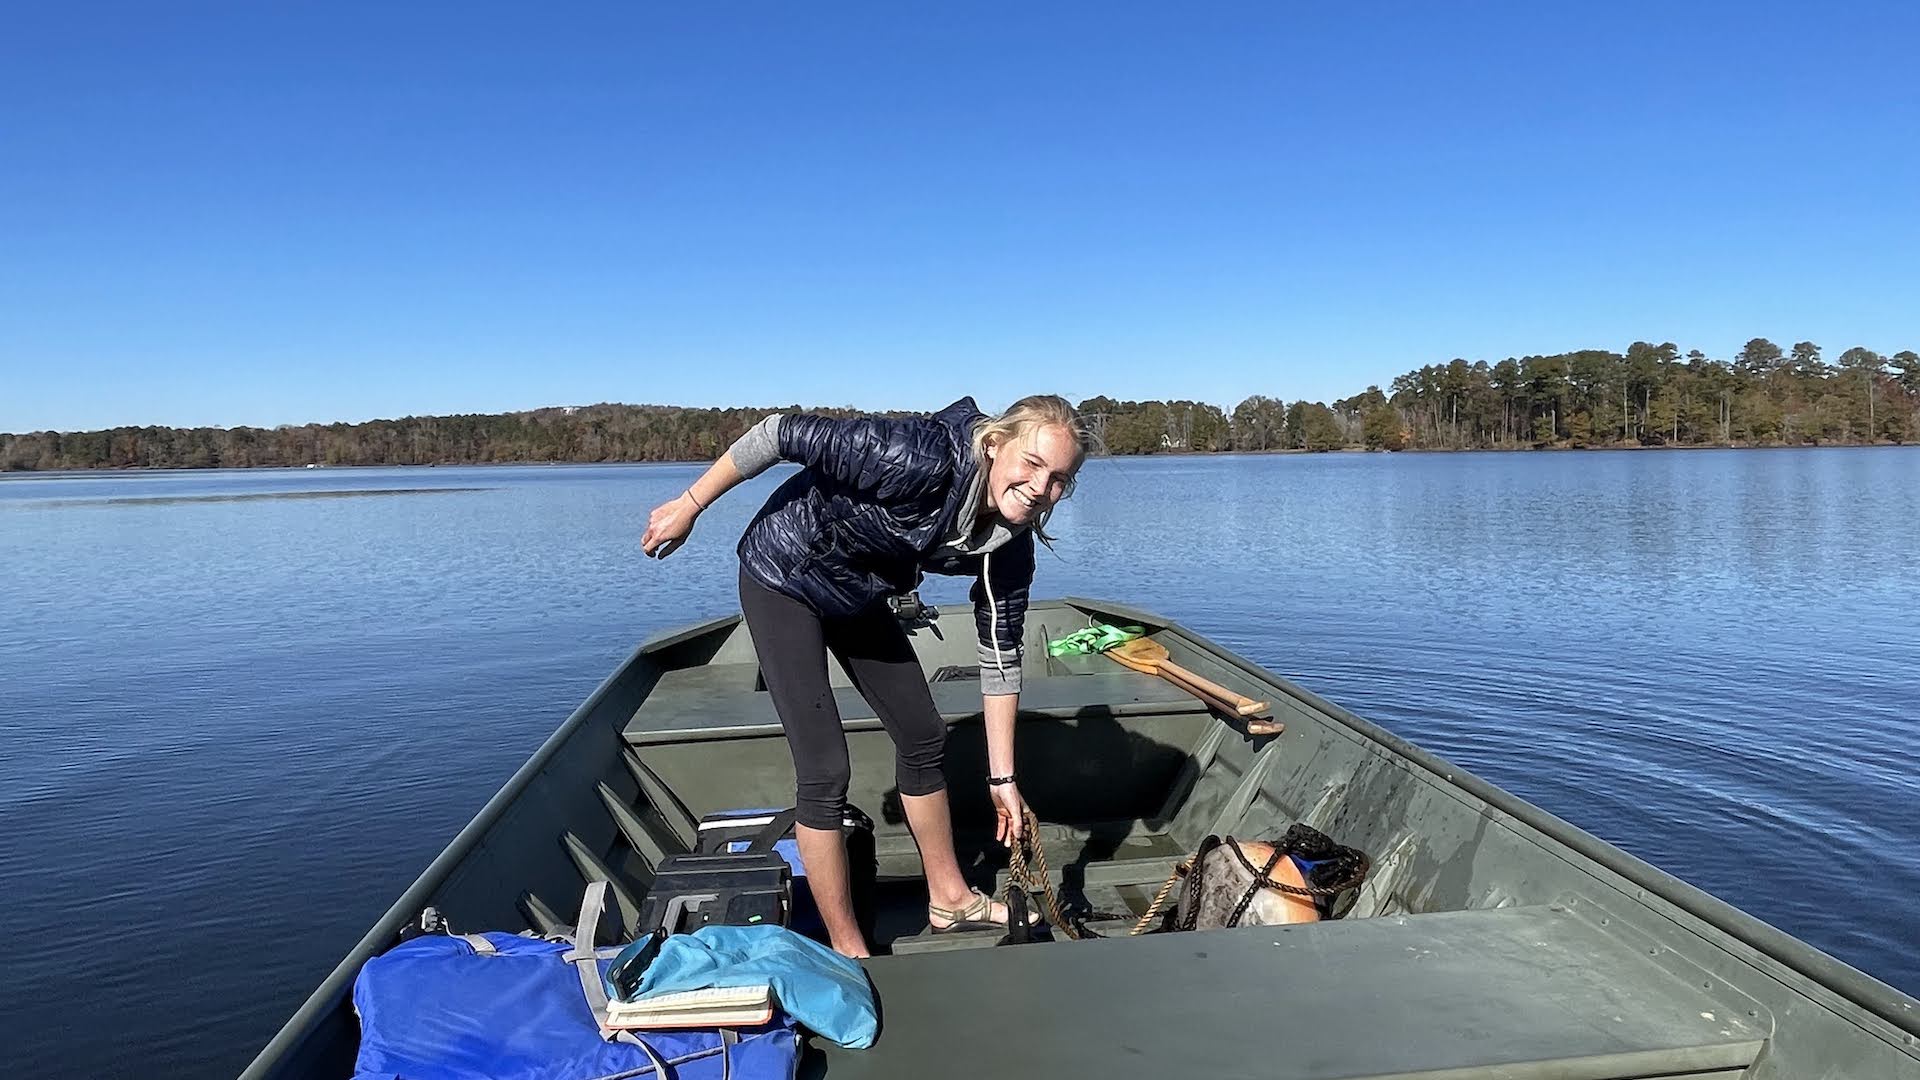 Student researcher on lake